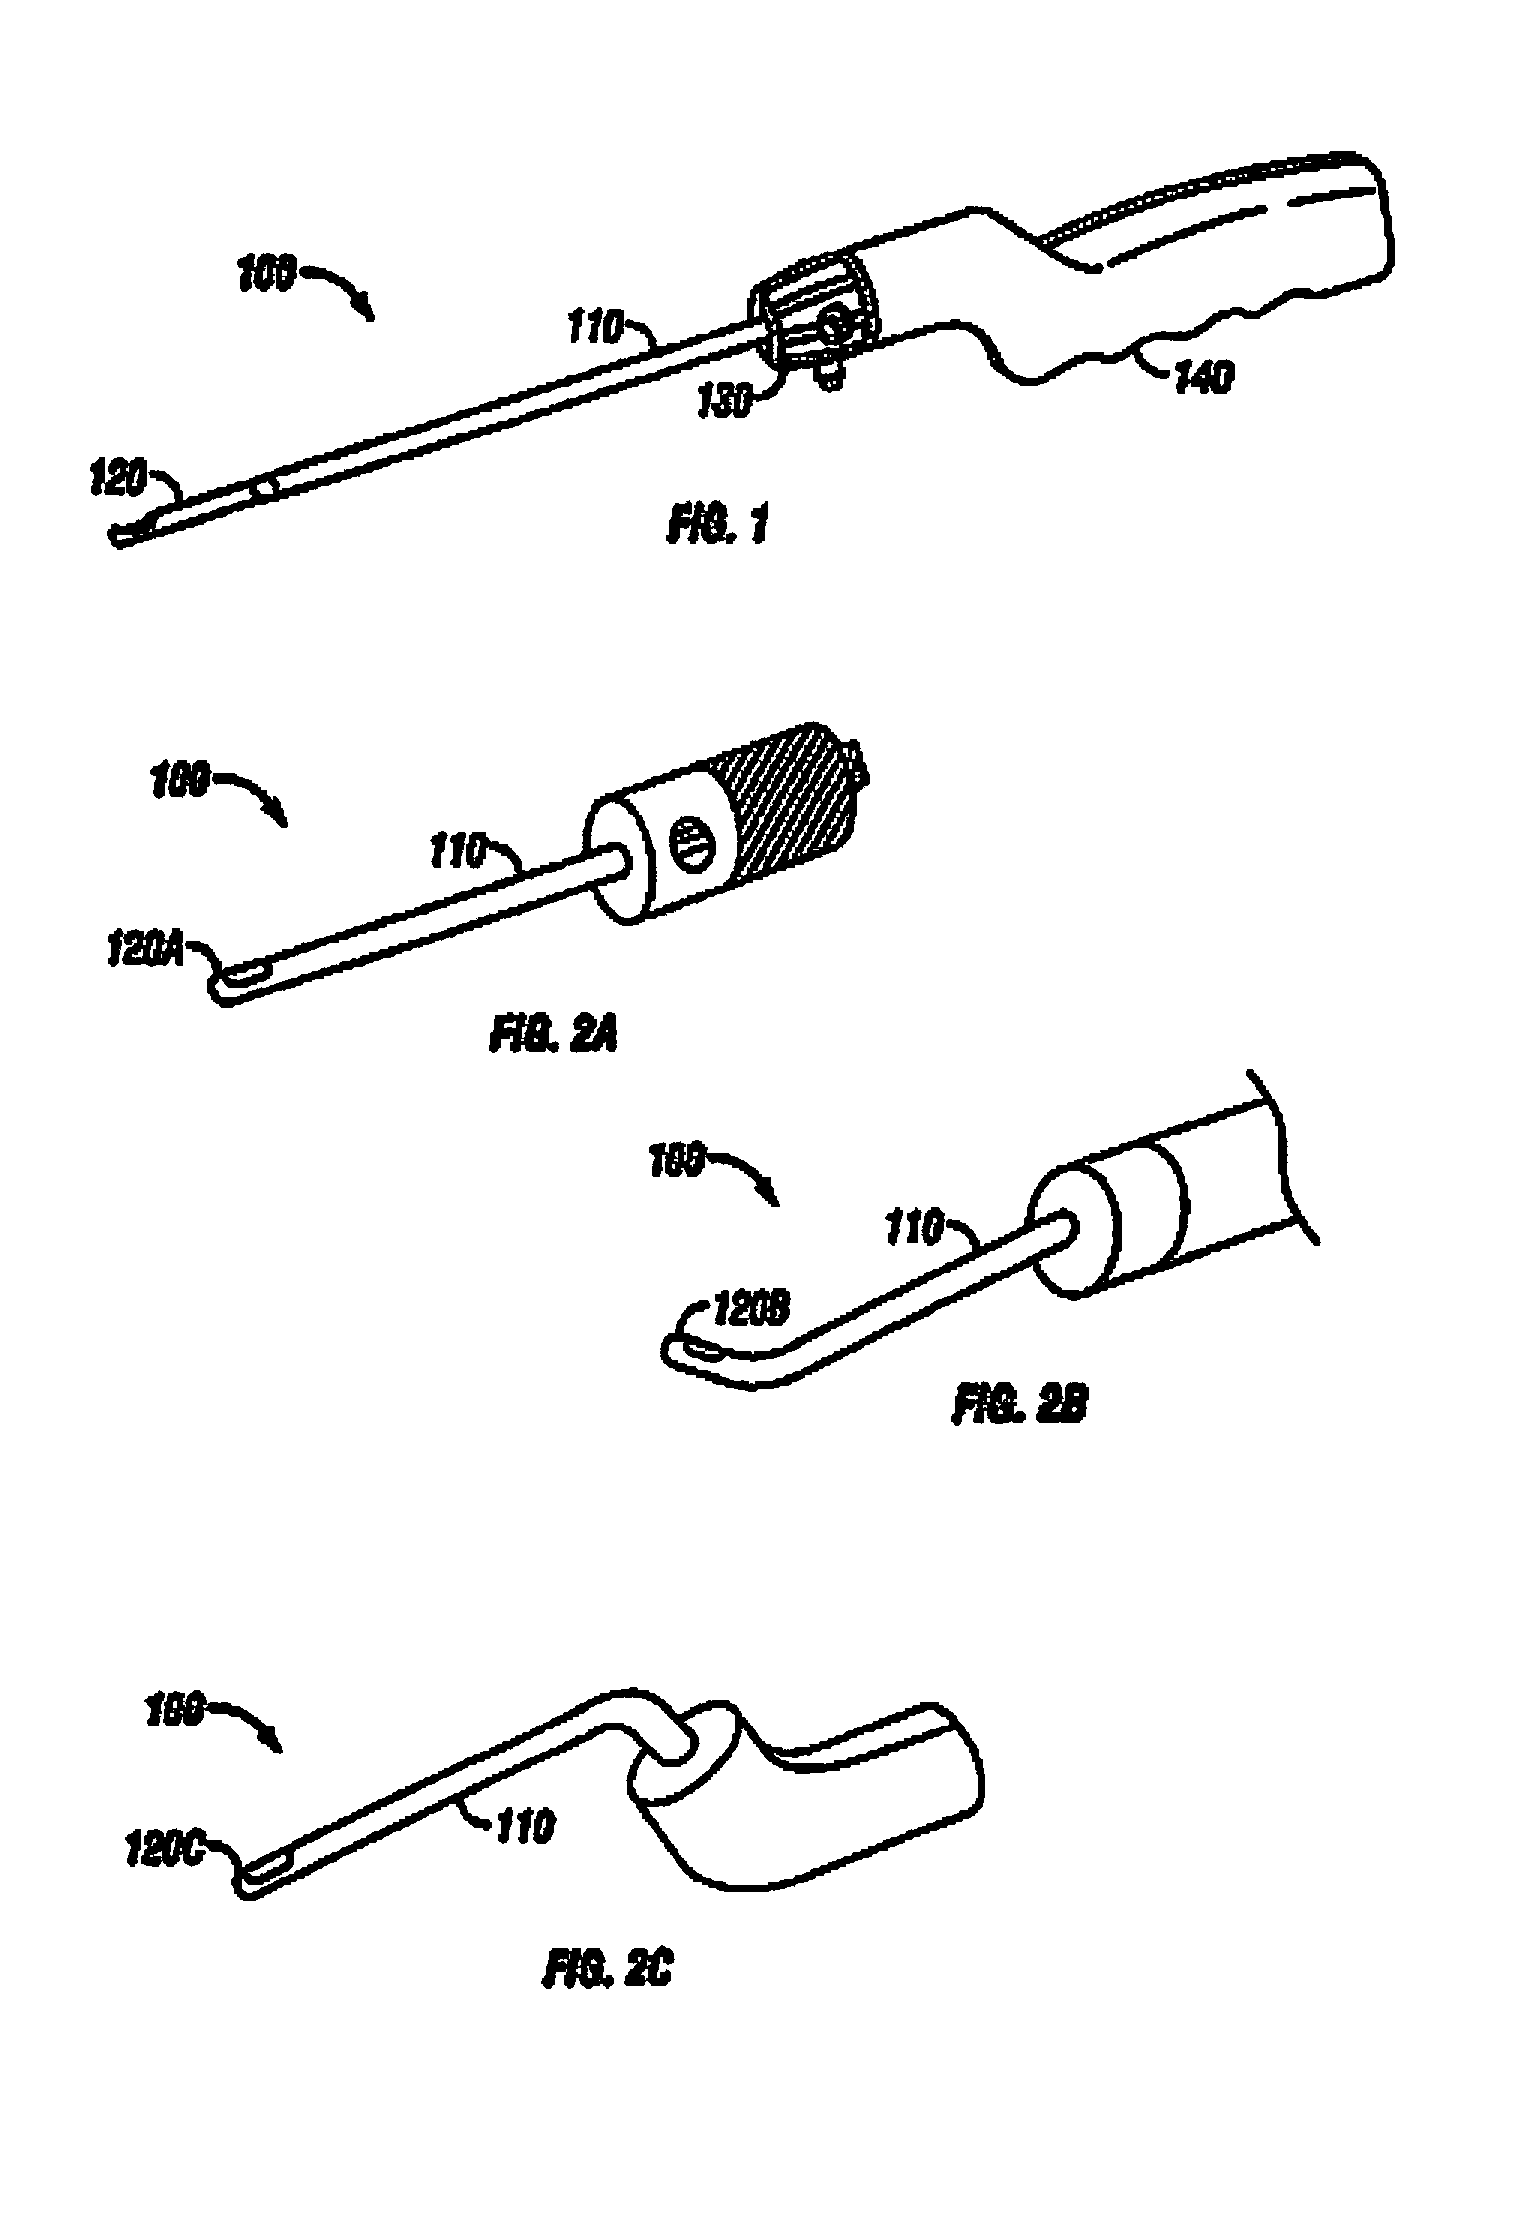 Surgical disc removal tool